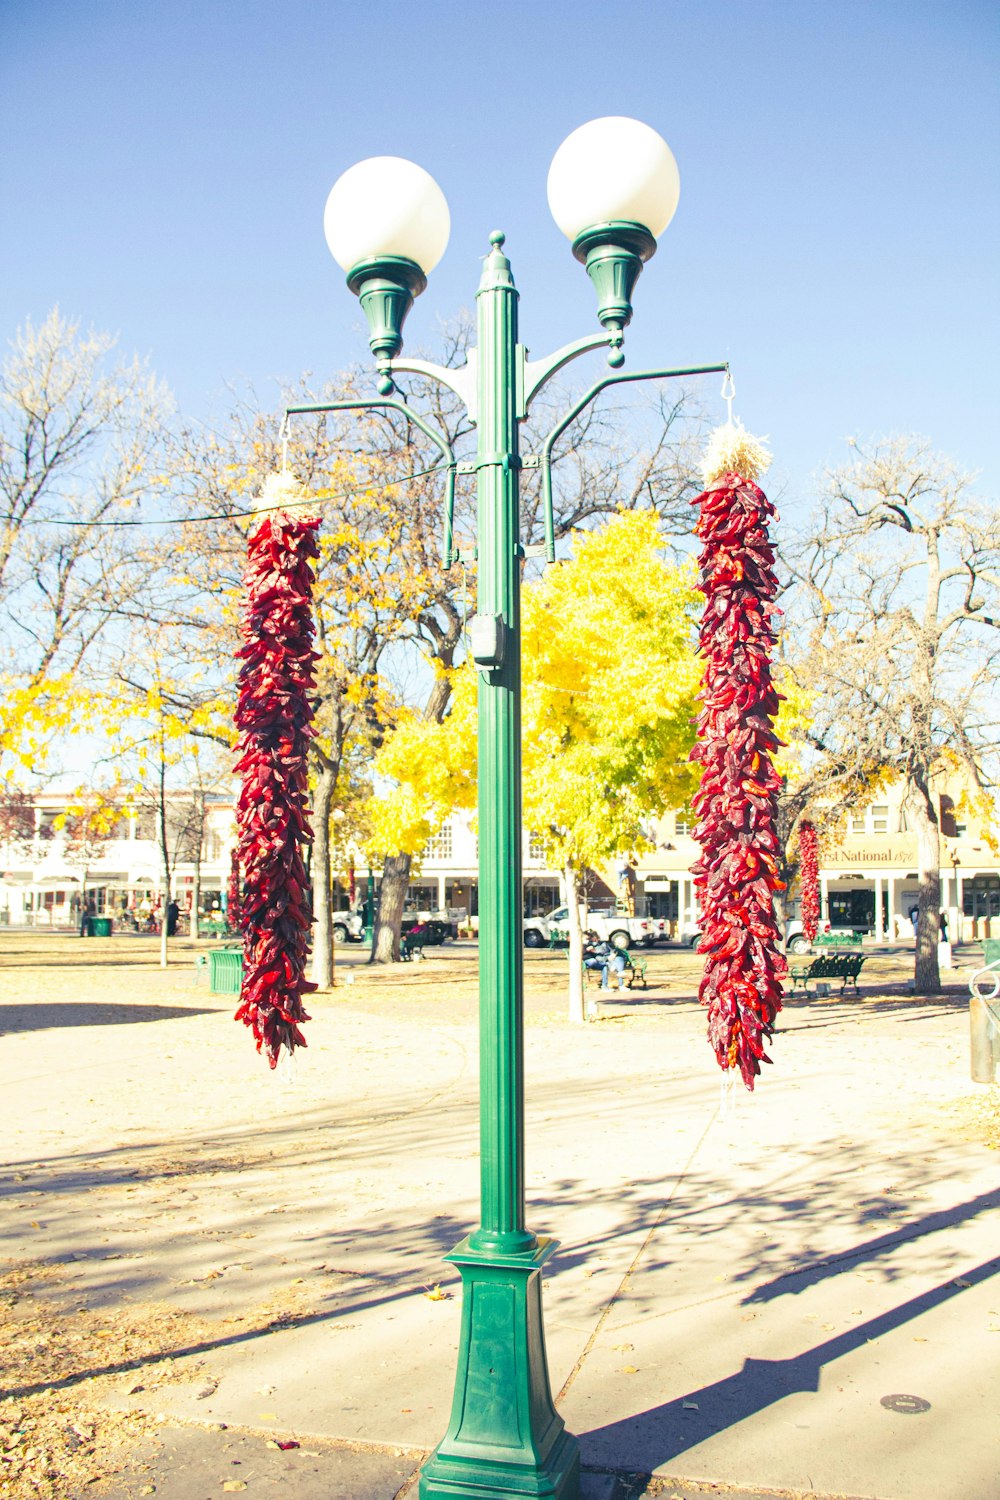 a green street light with red peppers hanging from it